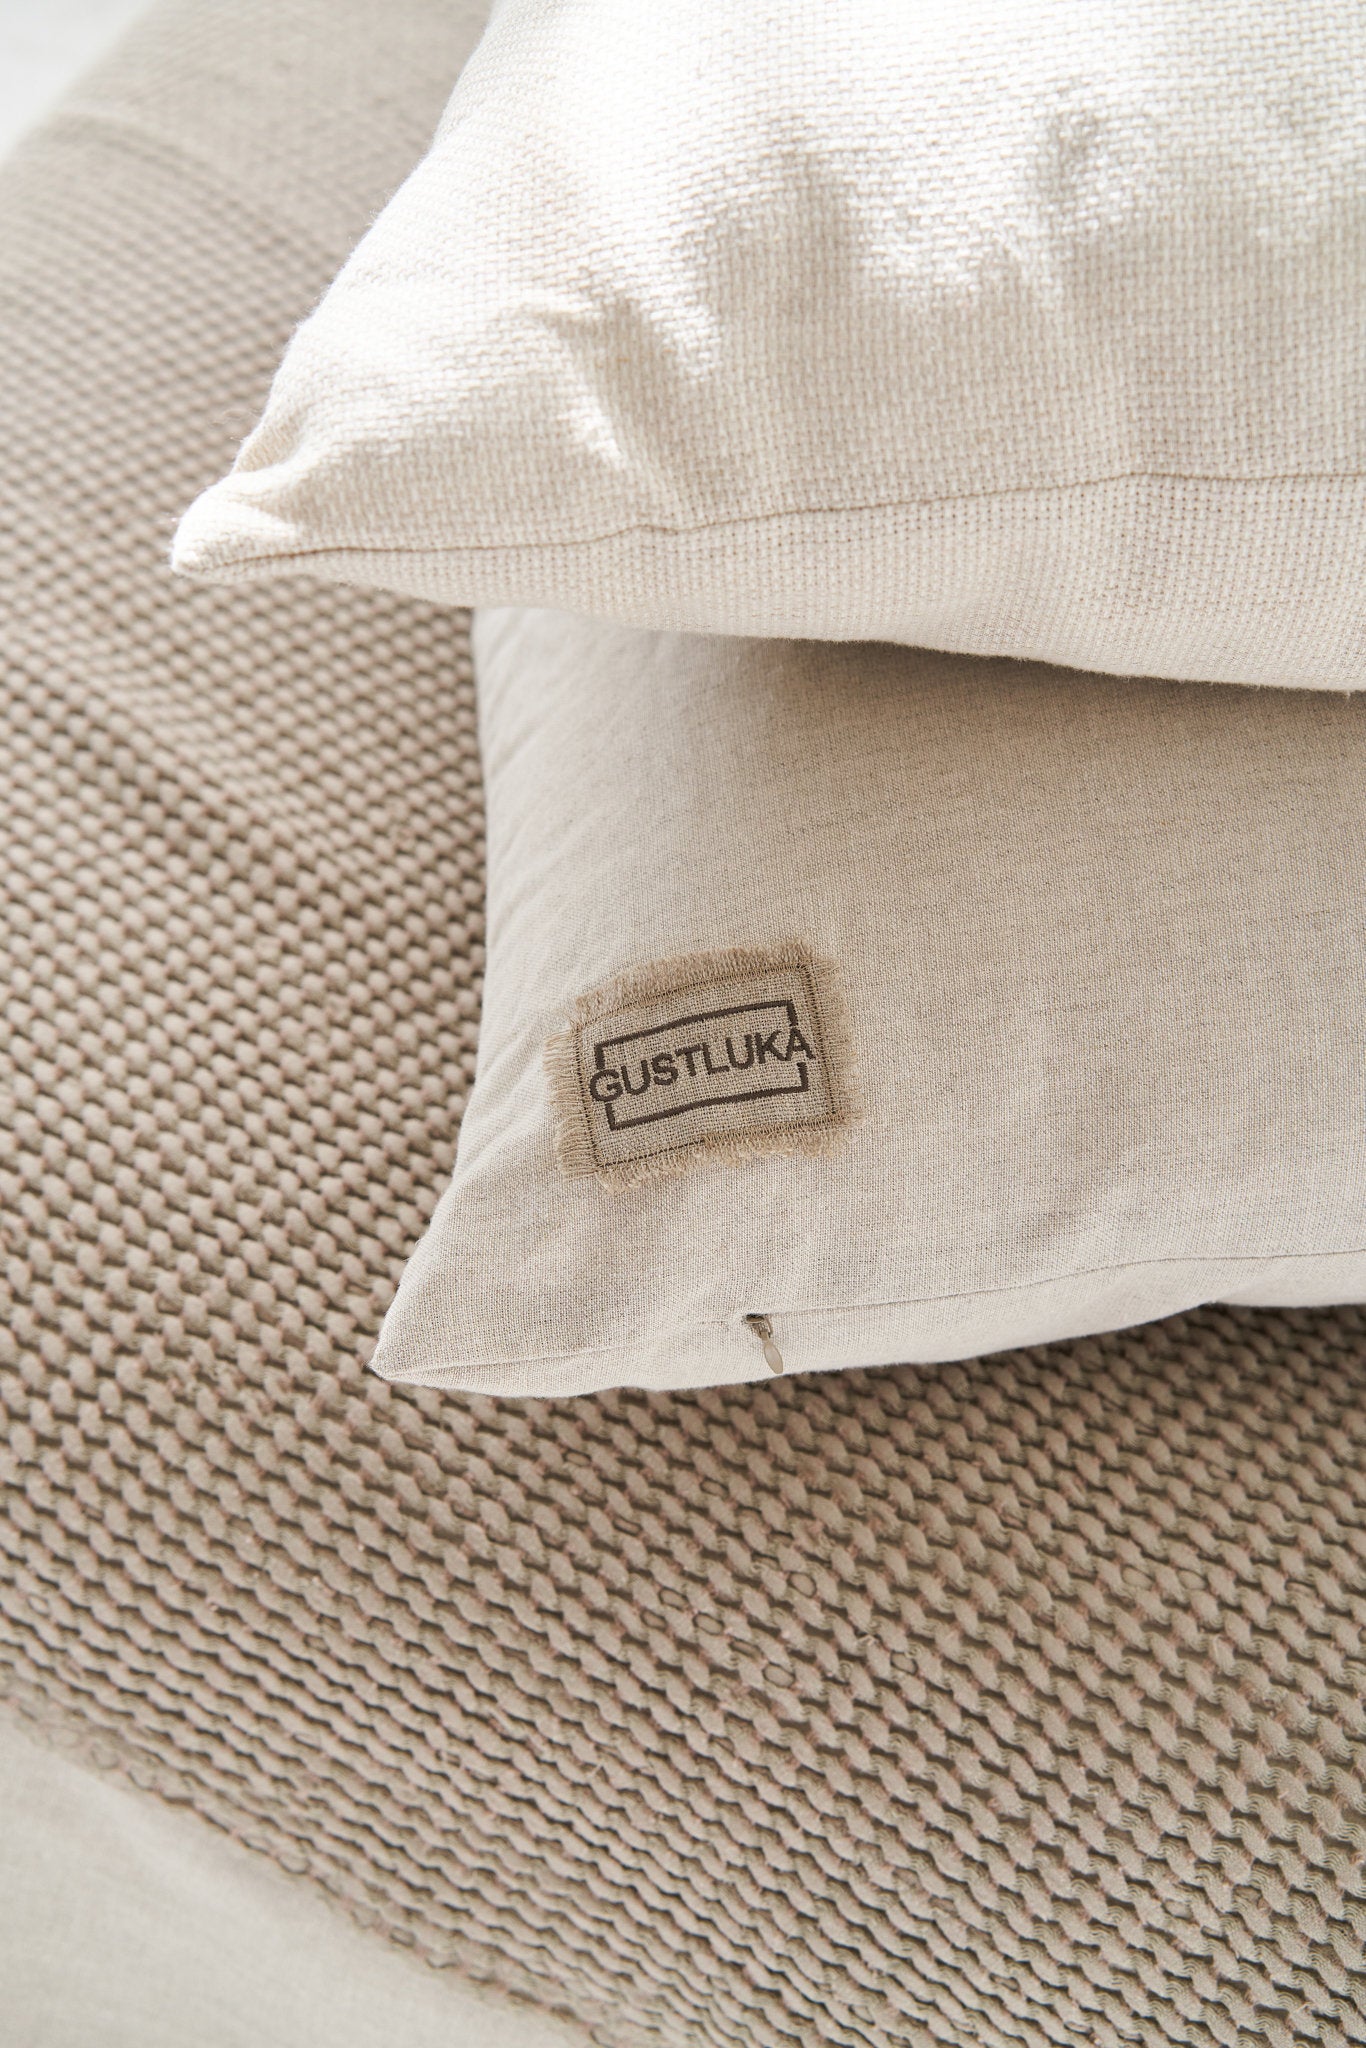 Decorative Linen Pillowcase, Natural 100% Organic Flax Linen Pillow Case Cover, Off White Linen Pillowcase With Zipper, Raw Linen Bedding from  collection by LinenStudioByGustluka